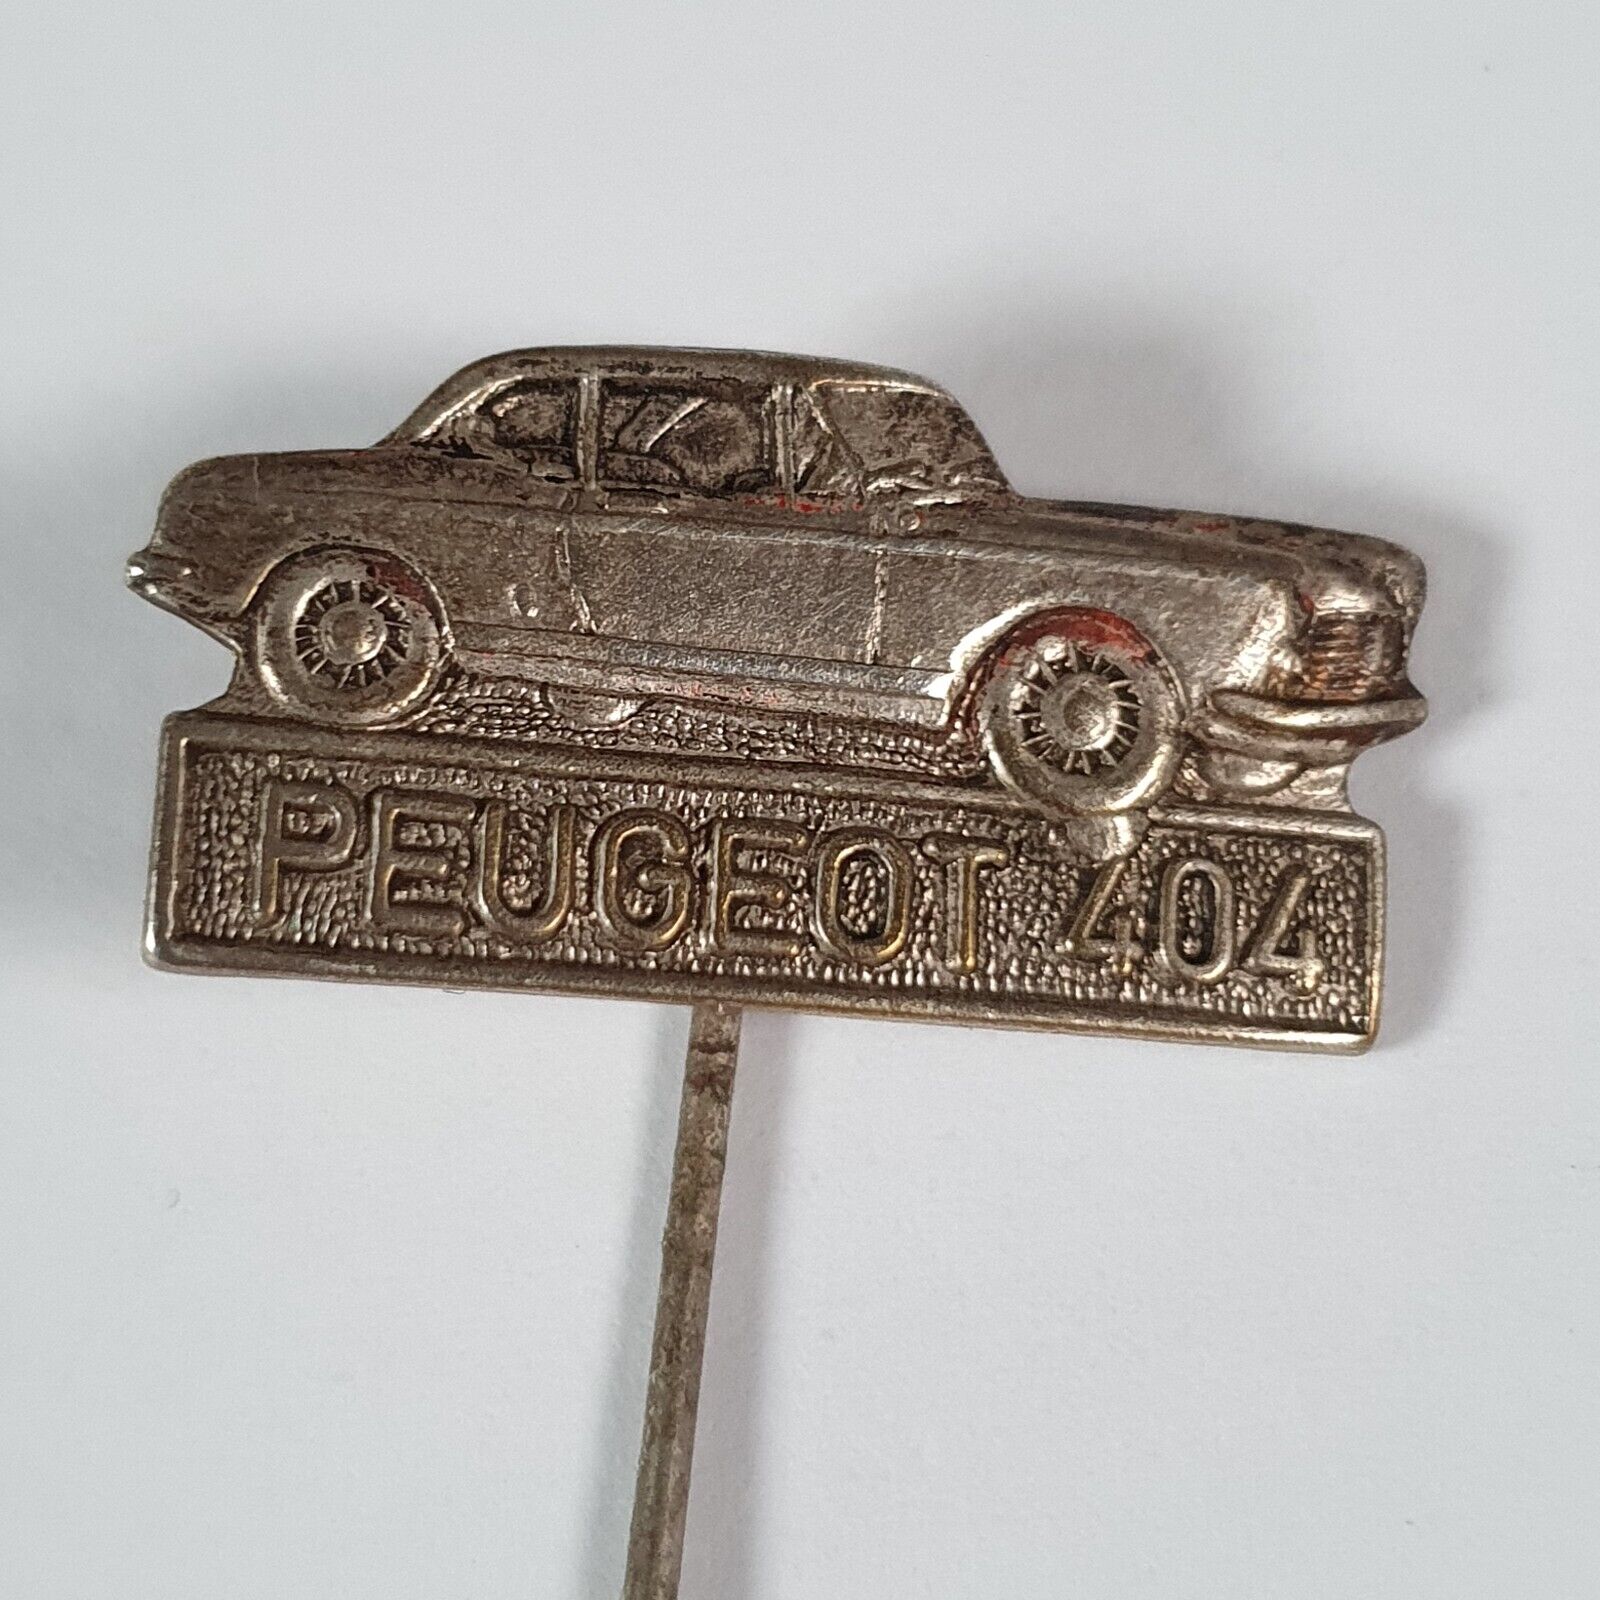 Peugeot 404 Old Metal Stick Pin Badge - Classic Car Vintage - French Classic